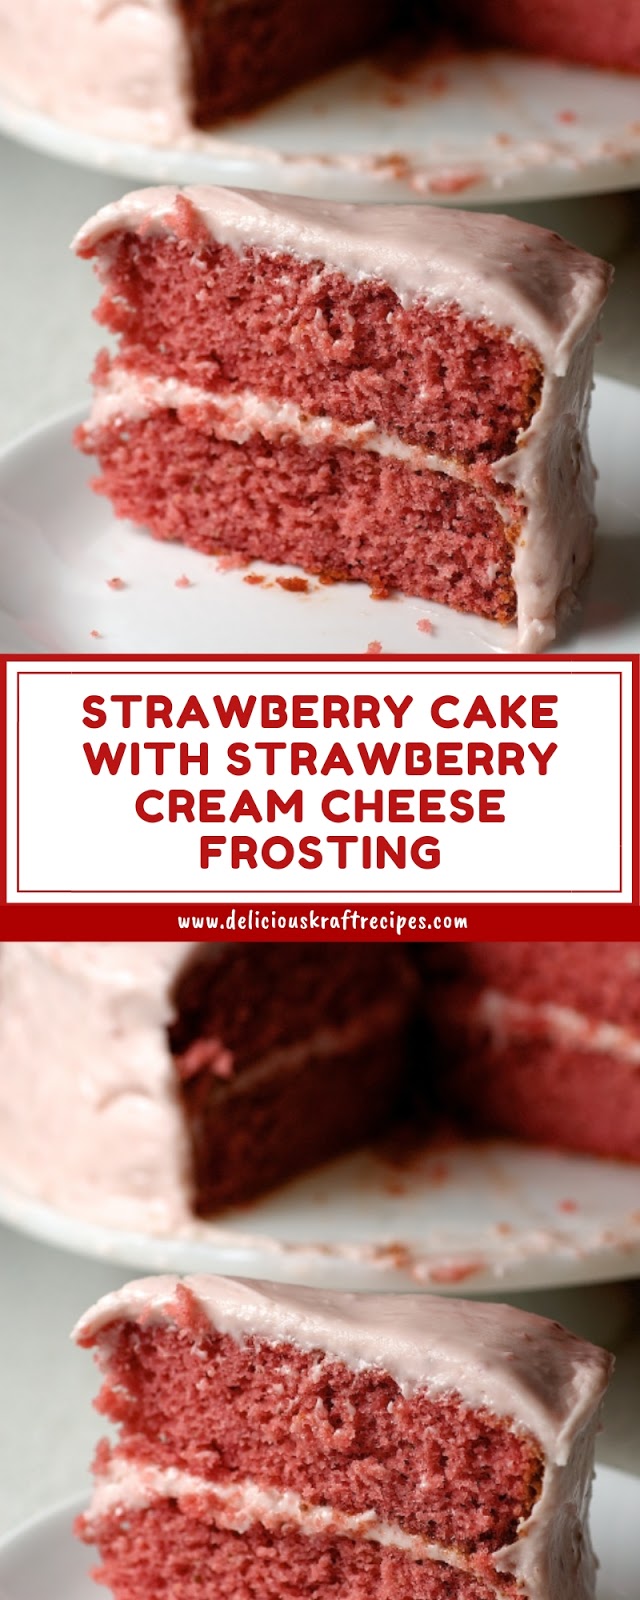 STRAWBERRY CAKE WITH STRAWBERRY CREAM CHEESE FROSTING